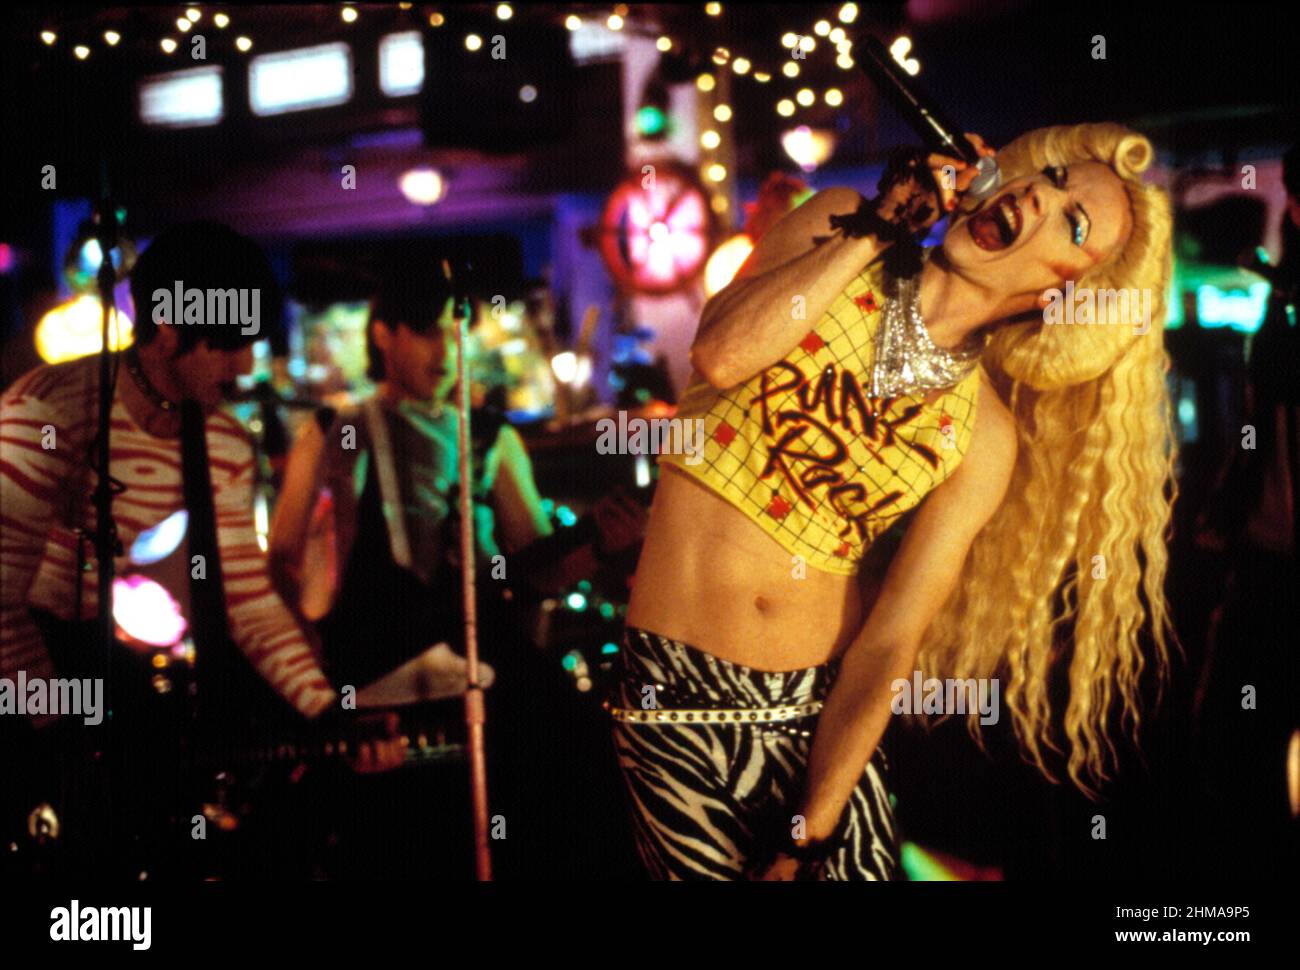 Hedwig and the Angry Inch (2001) directed by John Cameron Mitchell and starring John Cameron Mitchell, Miriam Shor and Stephen Trask. A transgender punk-rock singer from East Berlin tours the U.S. with her band as she tells her life story and follows the former lover/band-mate who stole her songs. Stock Photo